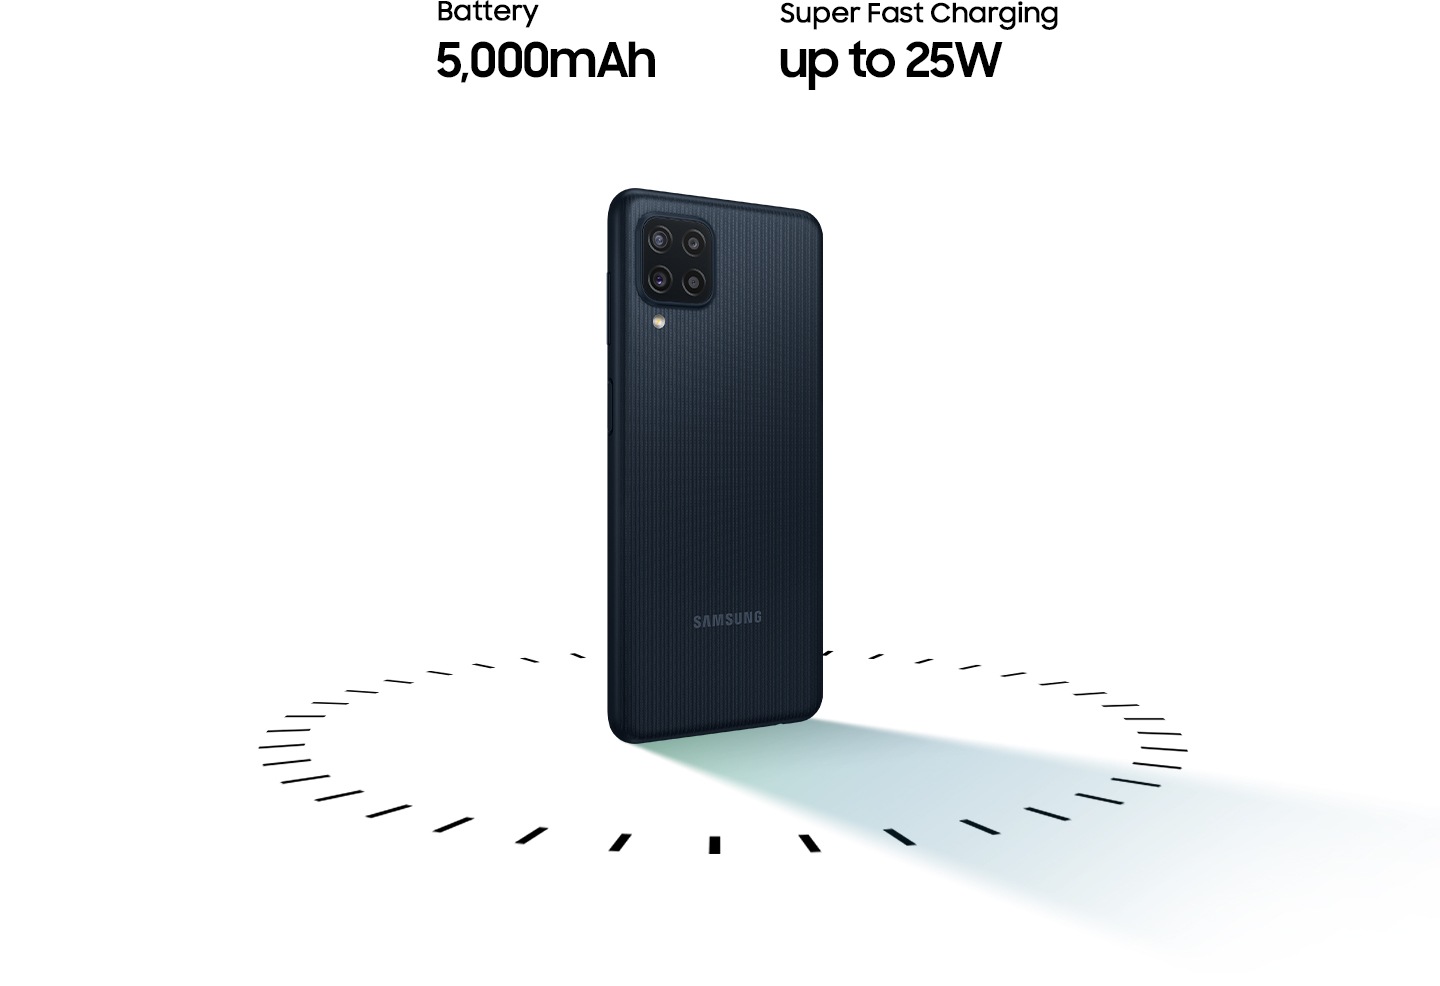 Galaxy M22 is standing with its back turned, surrounded by a dotted circle. Above are the words Battery 5,000mAh and Super Fast Charging 25W.